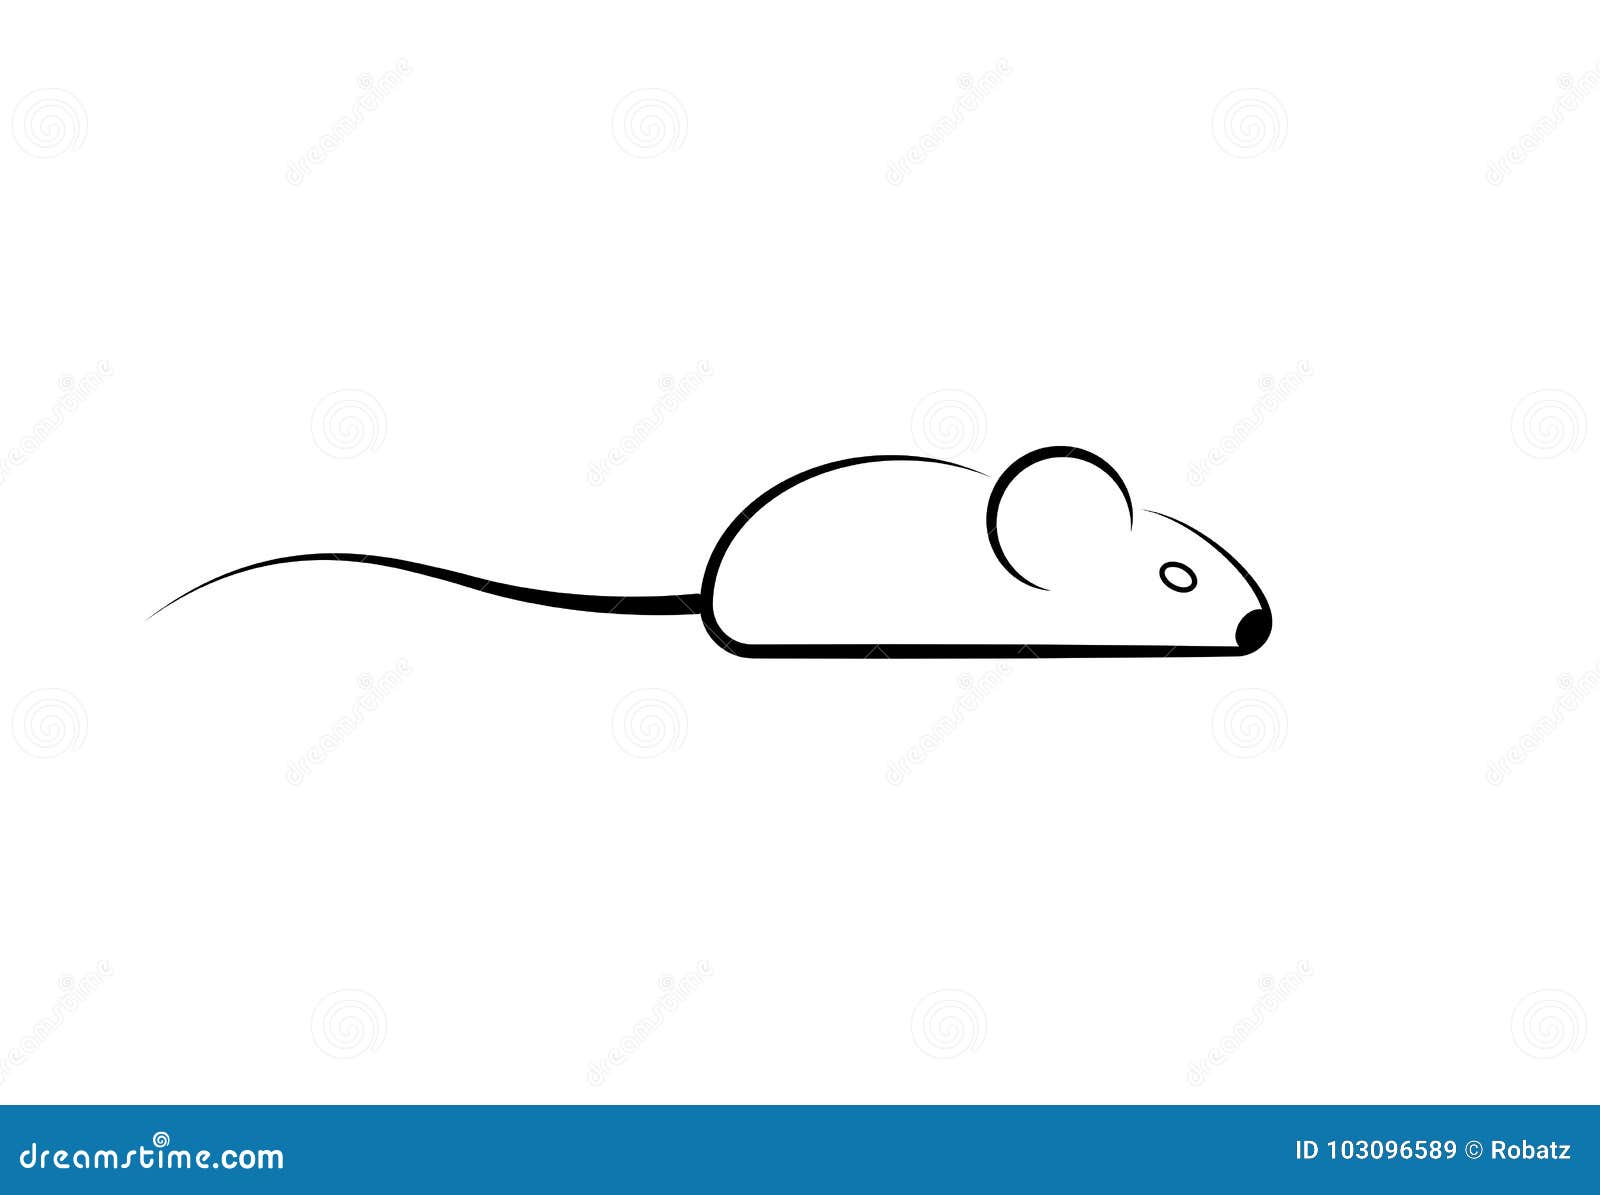 stylish icon of a mouse icone for background and print.